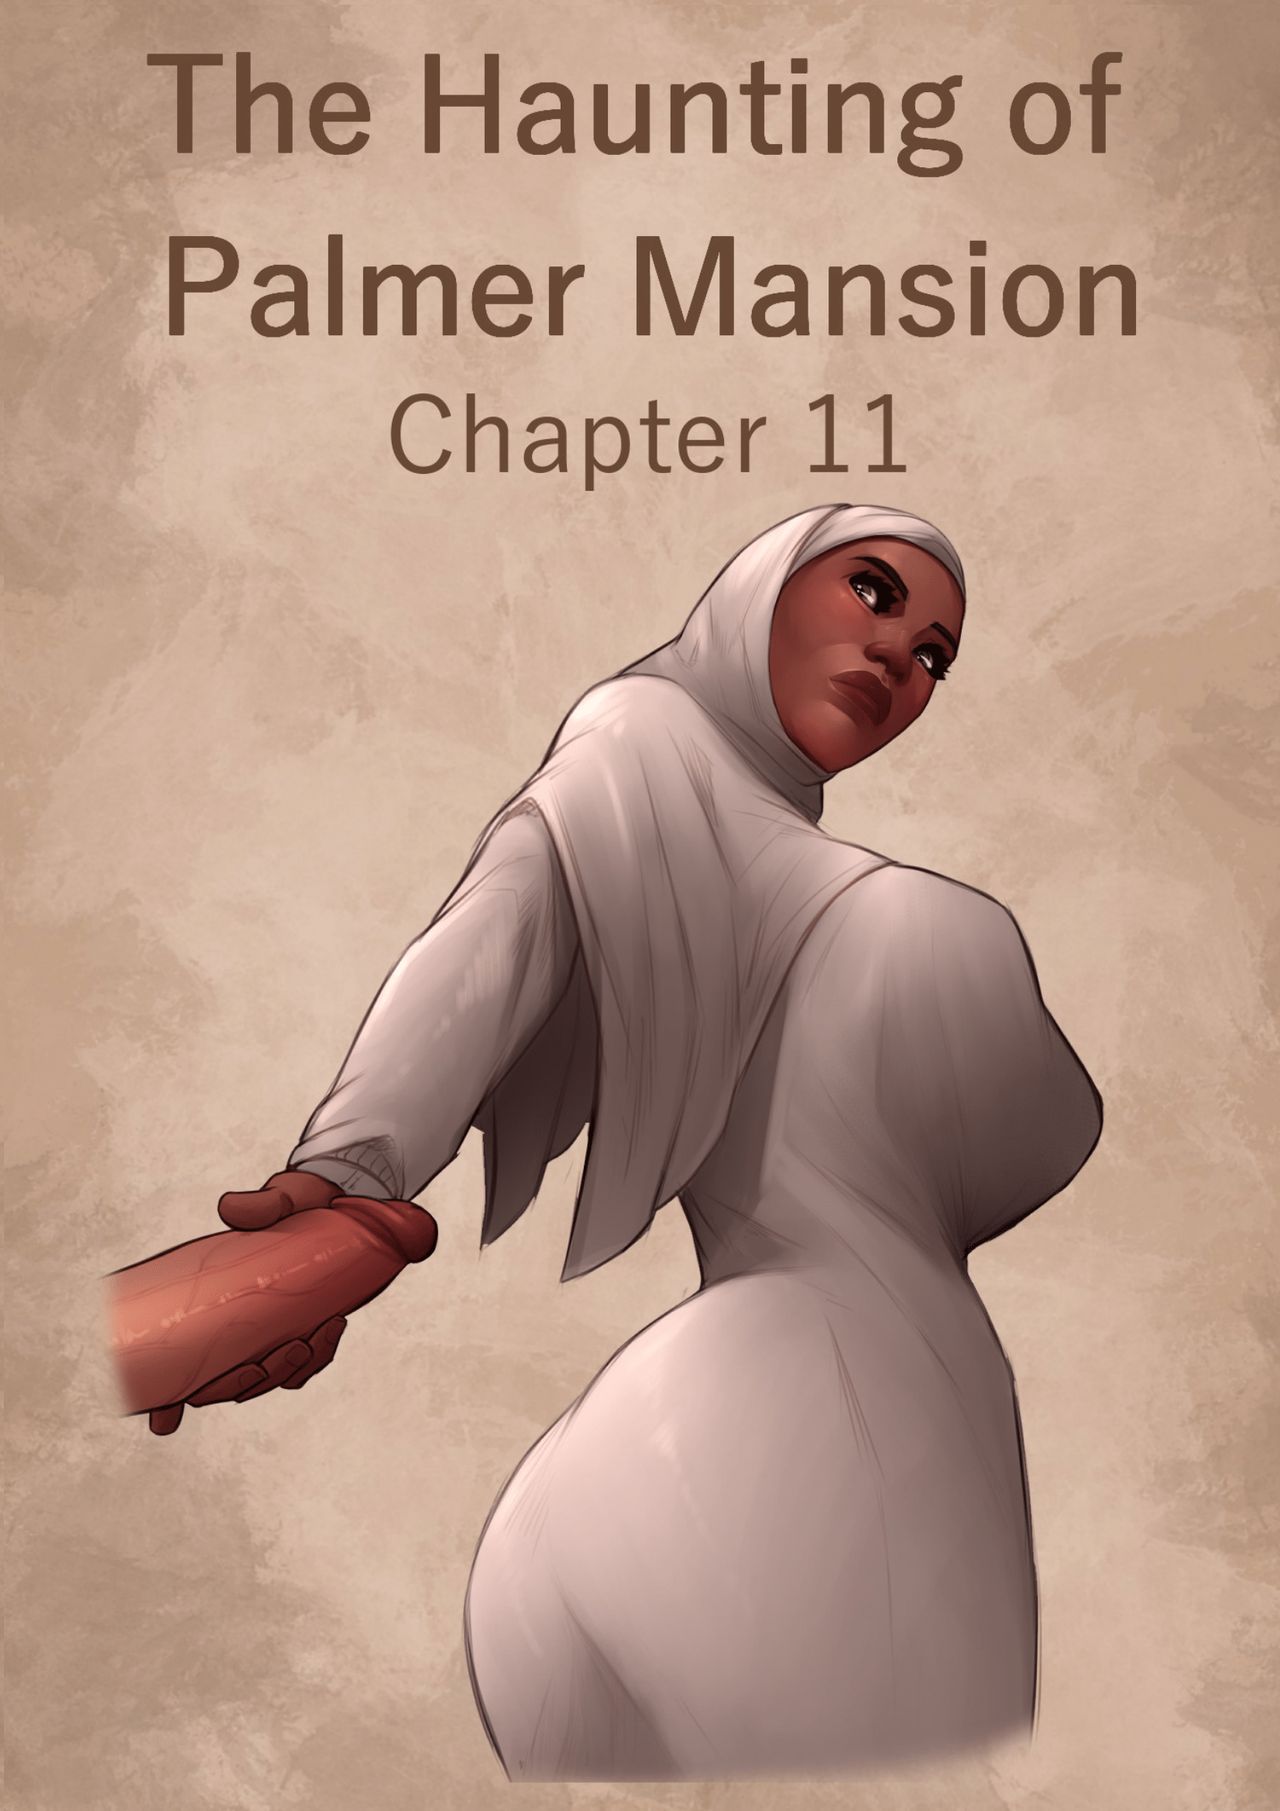 1862389 main The Haunting of Palmer Mansion Chapter 11 01